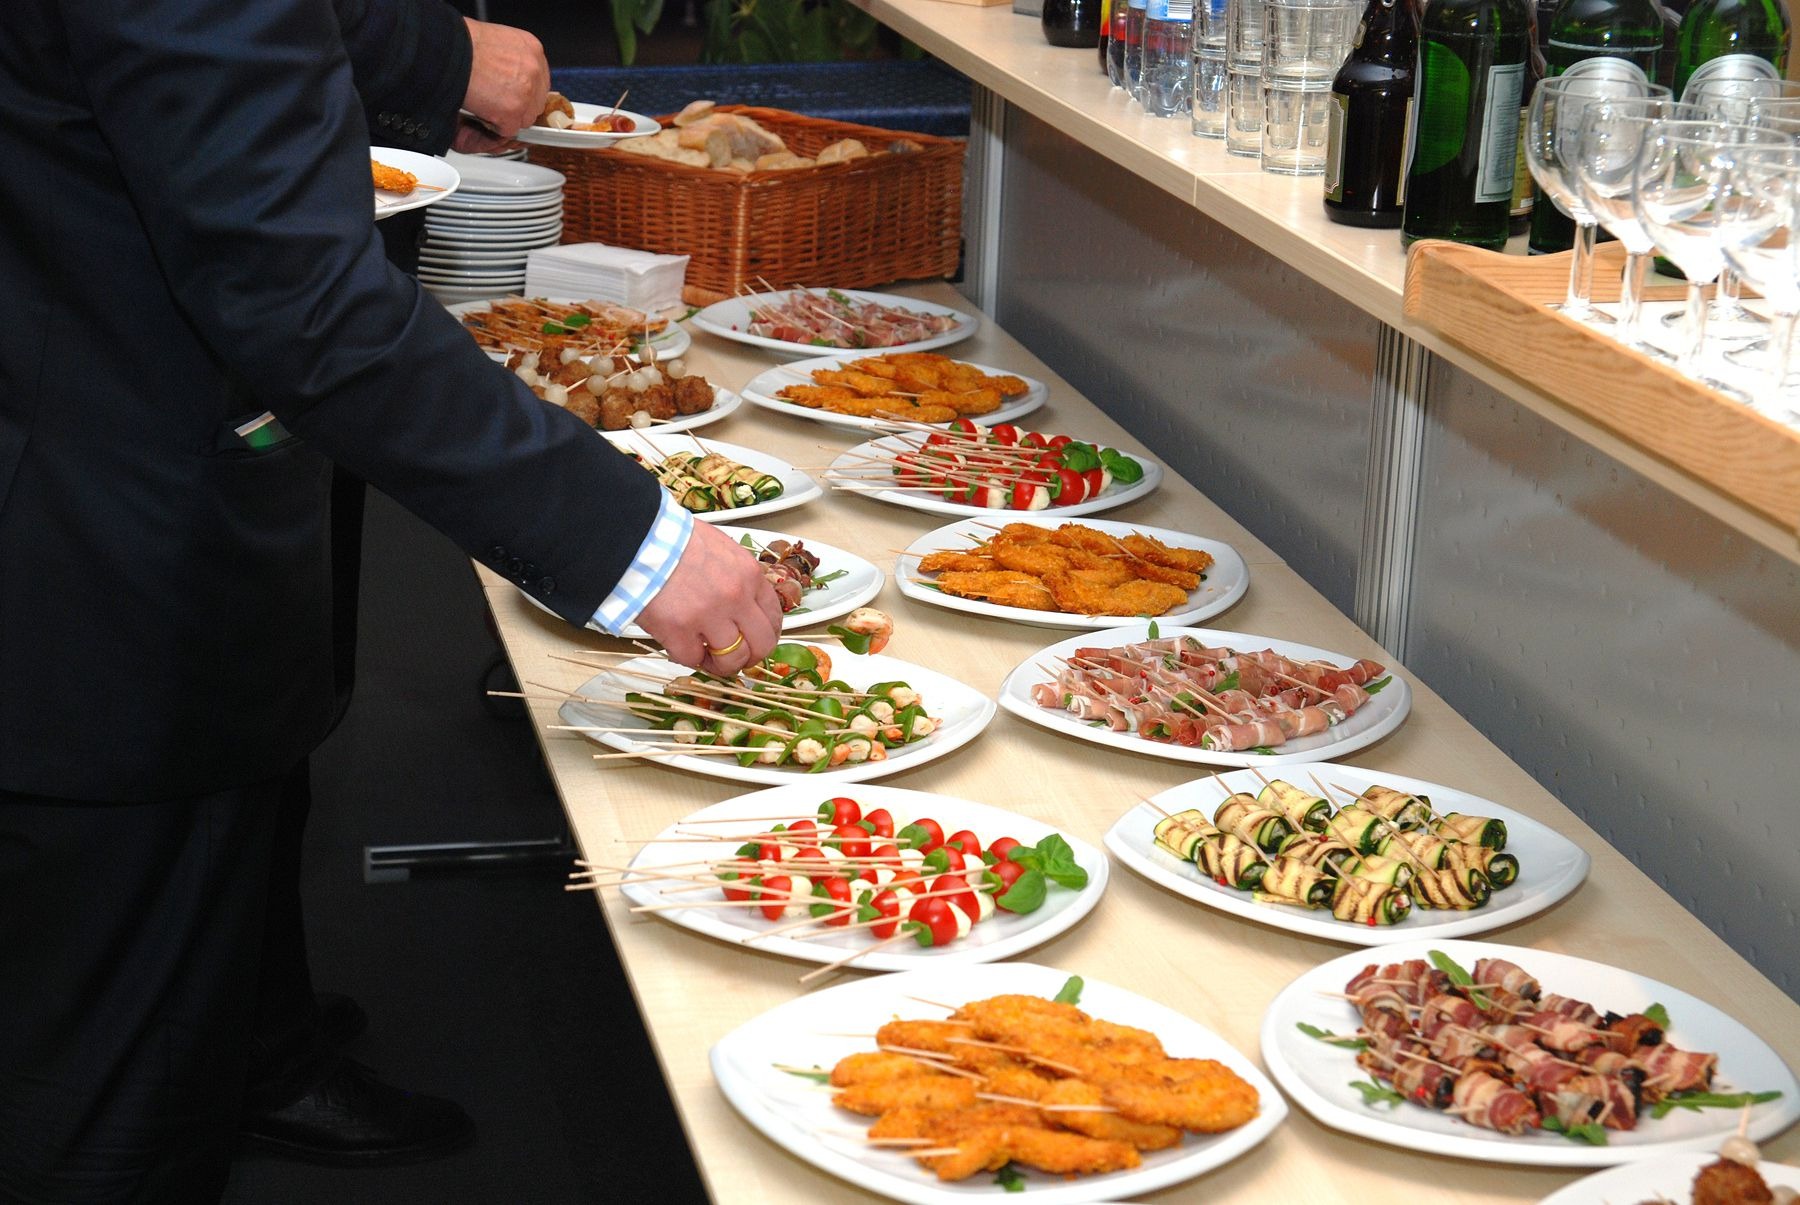 Catering Companies: What Tasks Do They Handle?